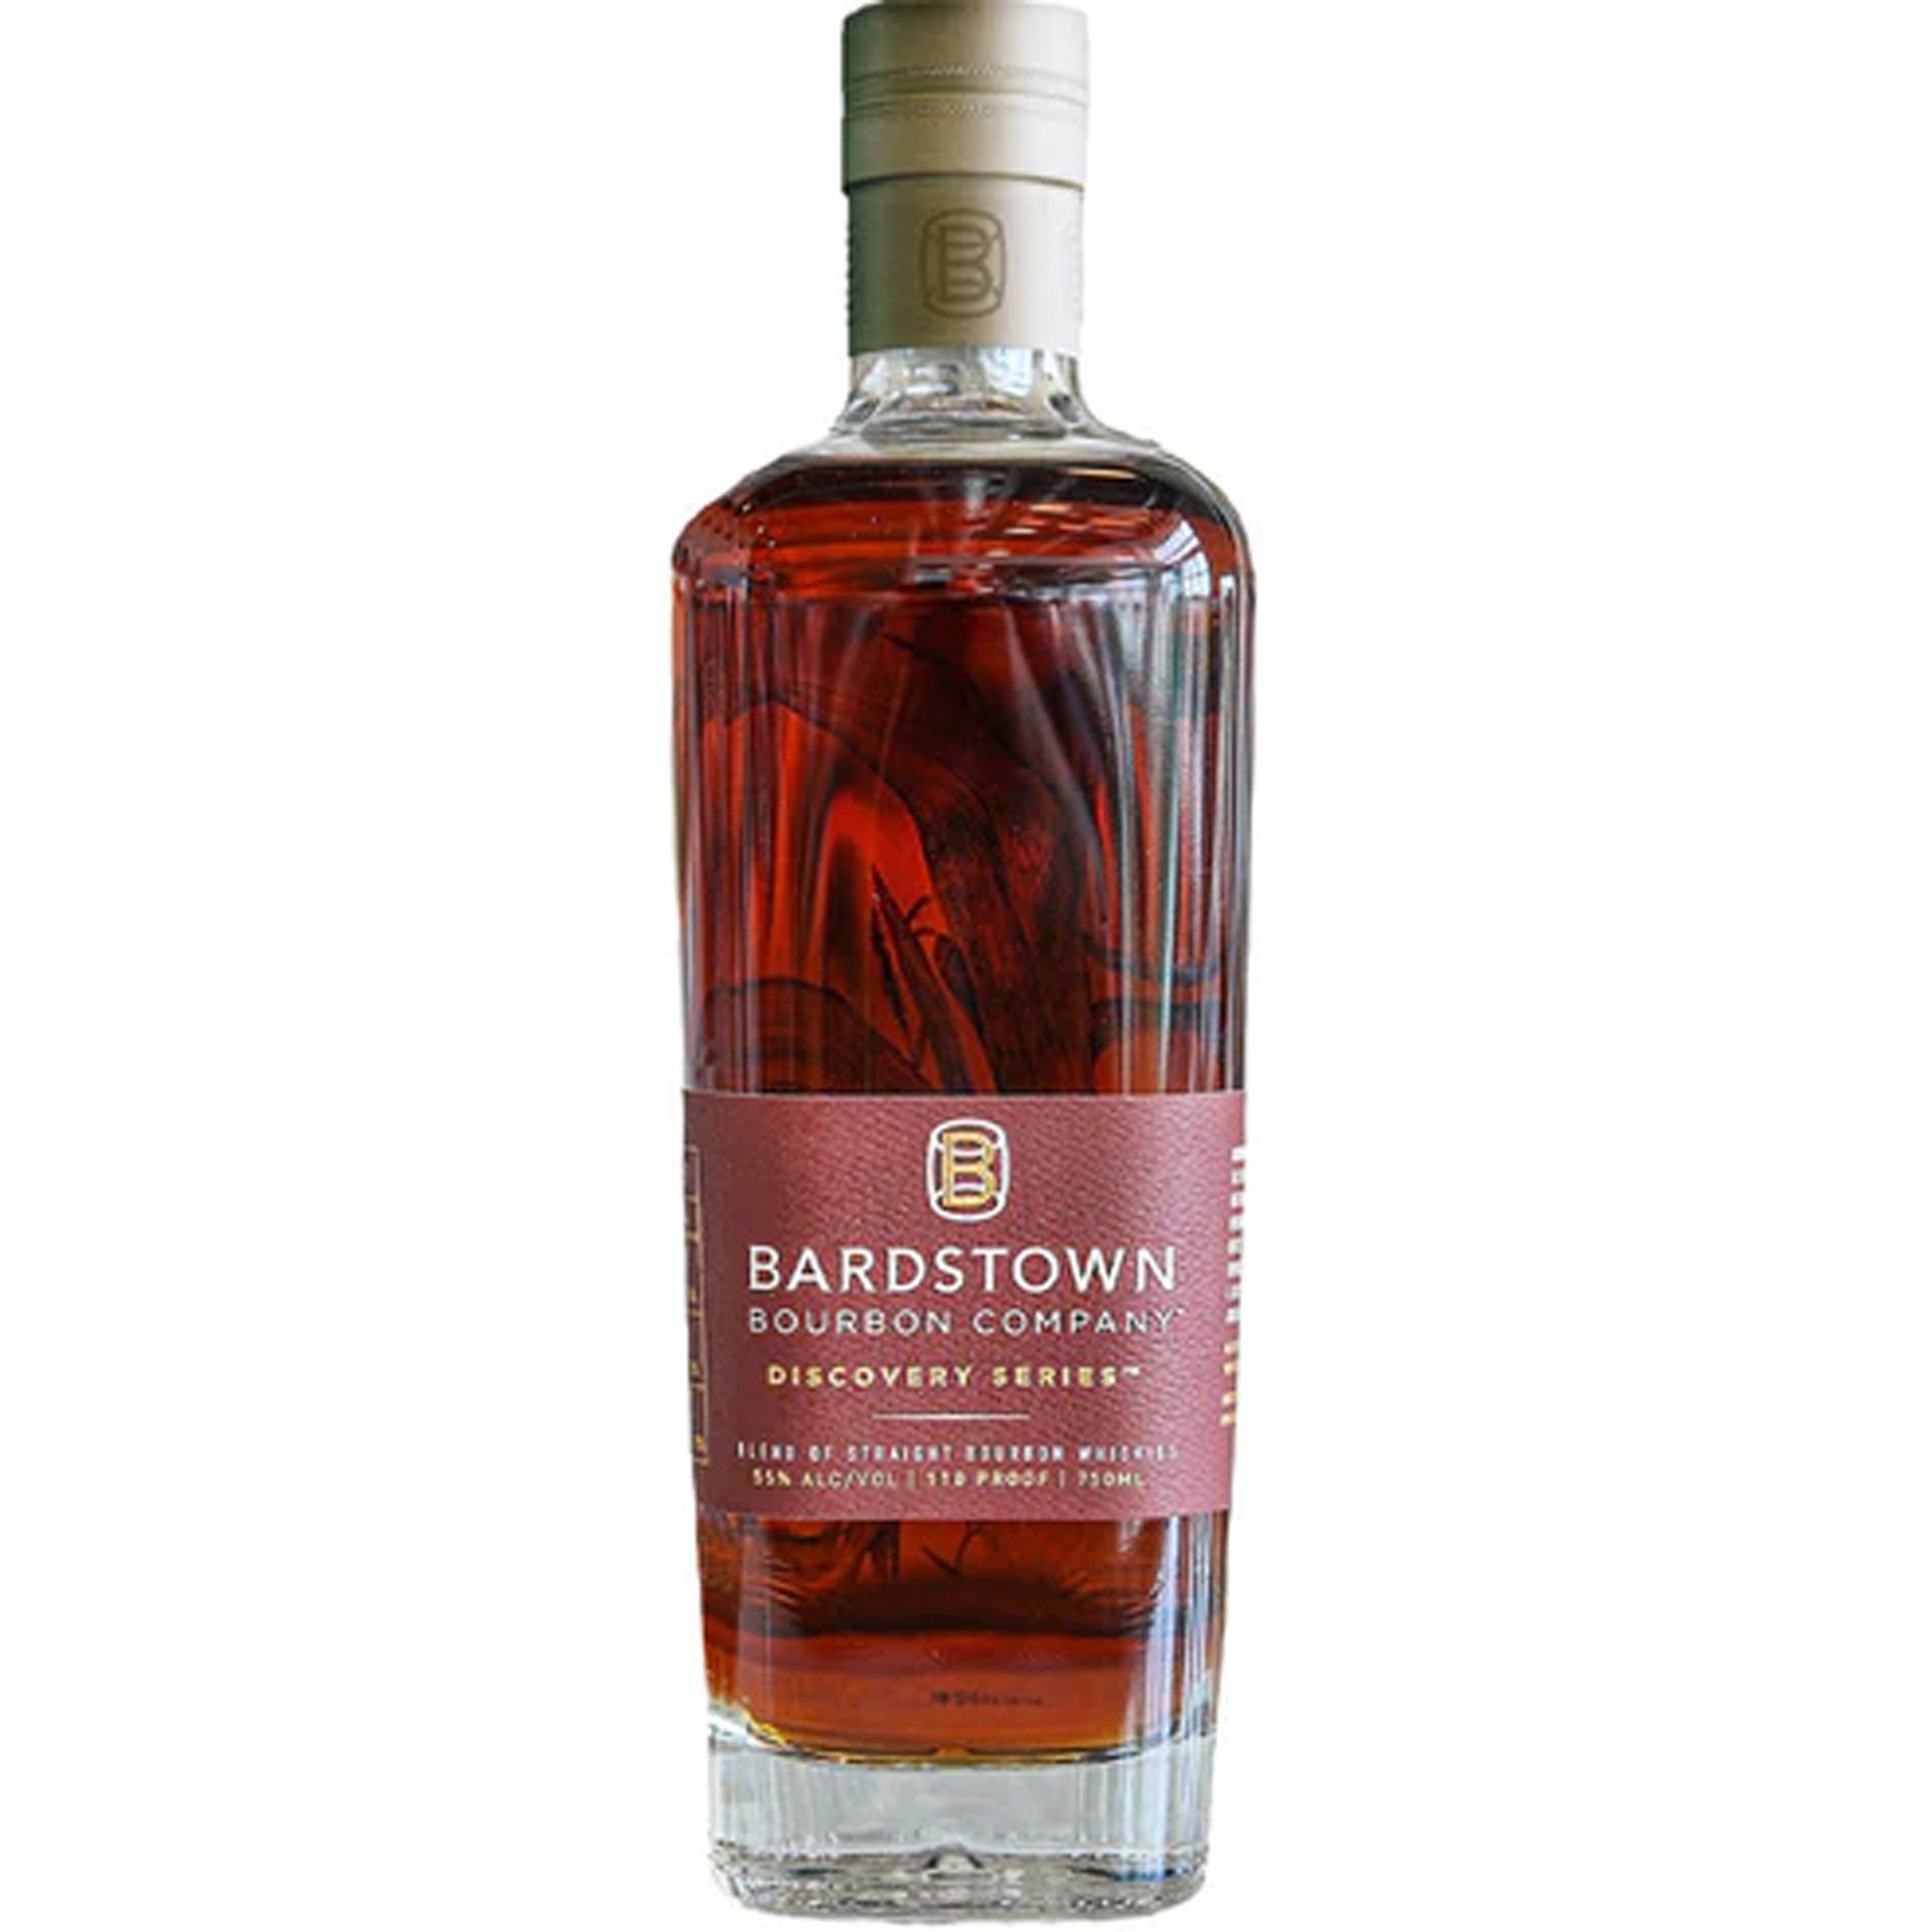 Bardstown Bourbon Company Discovery Series #8